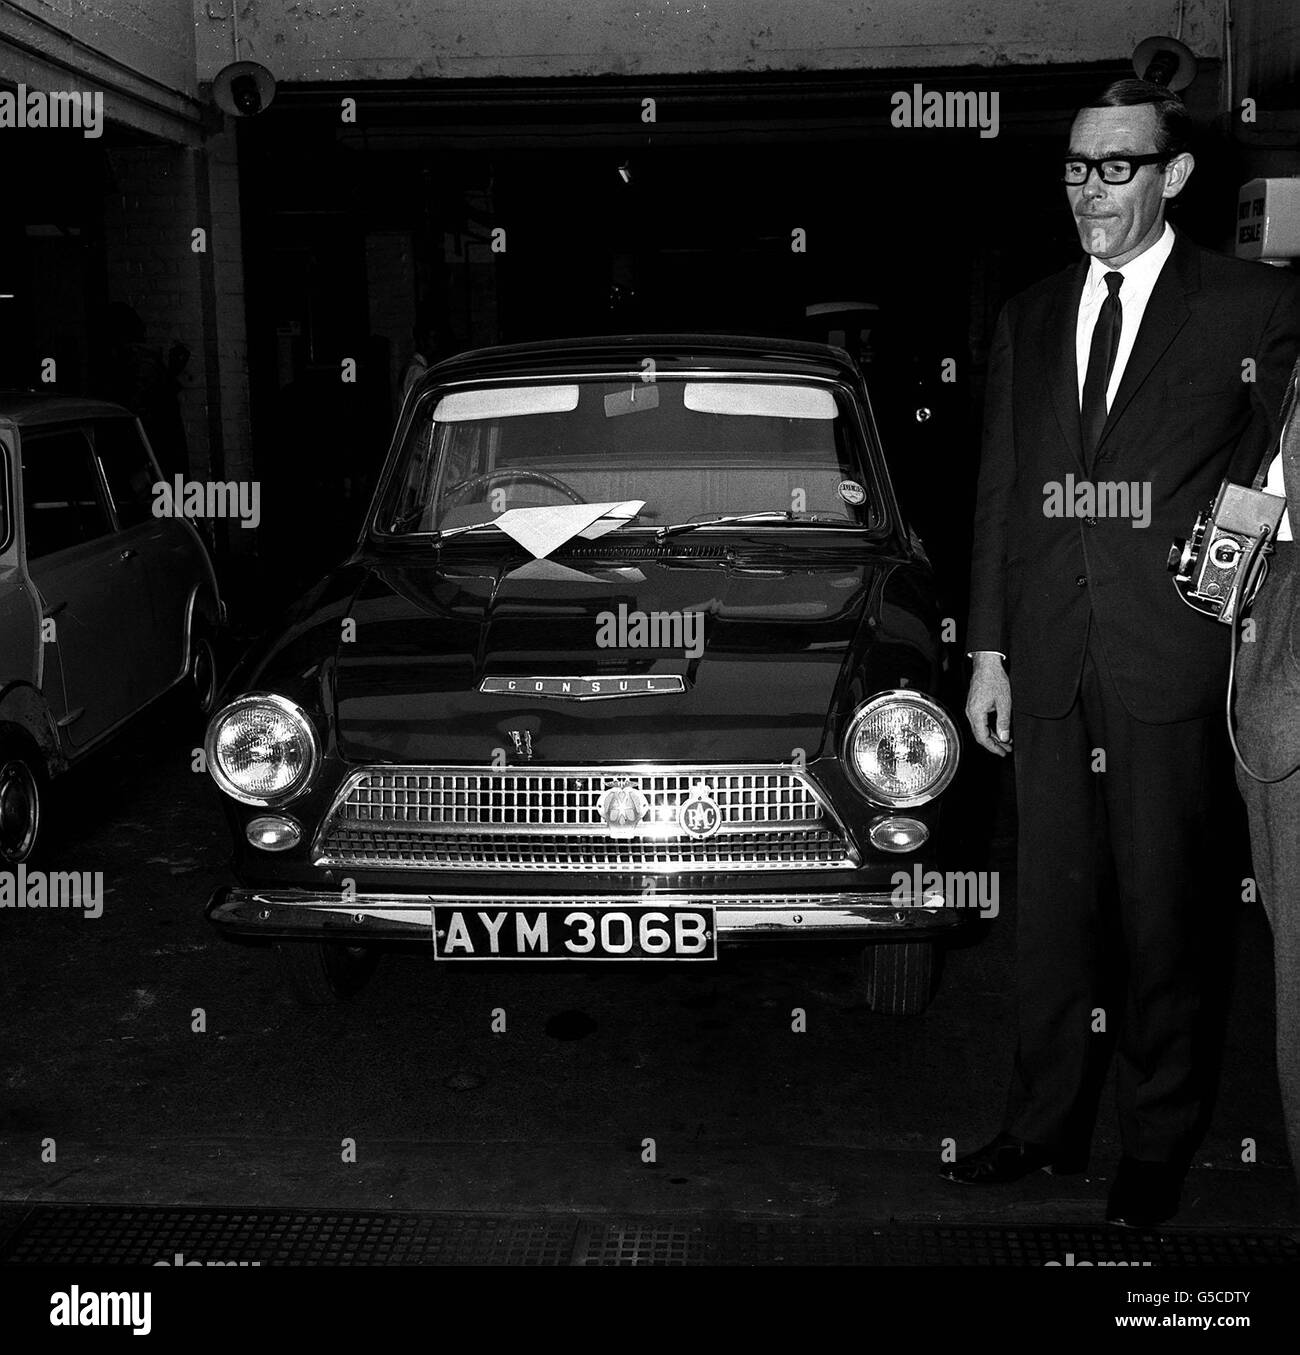 1965: The green Ford Cortina, one of the getaway cars used in the escape of train robber Ronald Biggs and 3 other men from Wandsworth prison last week. The car was found abandoned in a street in Holloway, London. To the right is Mr Torrington, owner of Autohall Car Hire from which the car was hired. Stock Photo